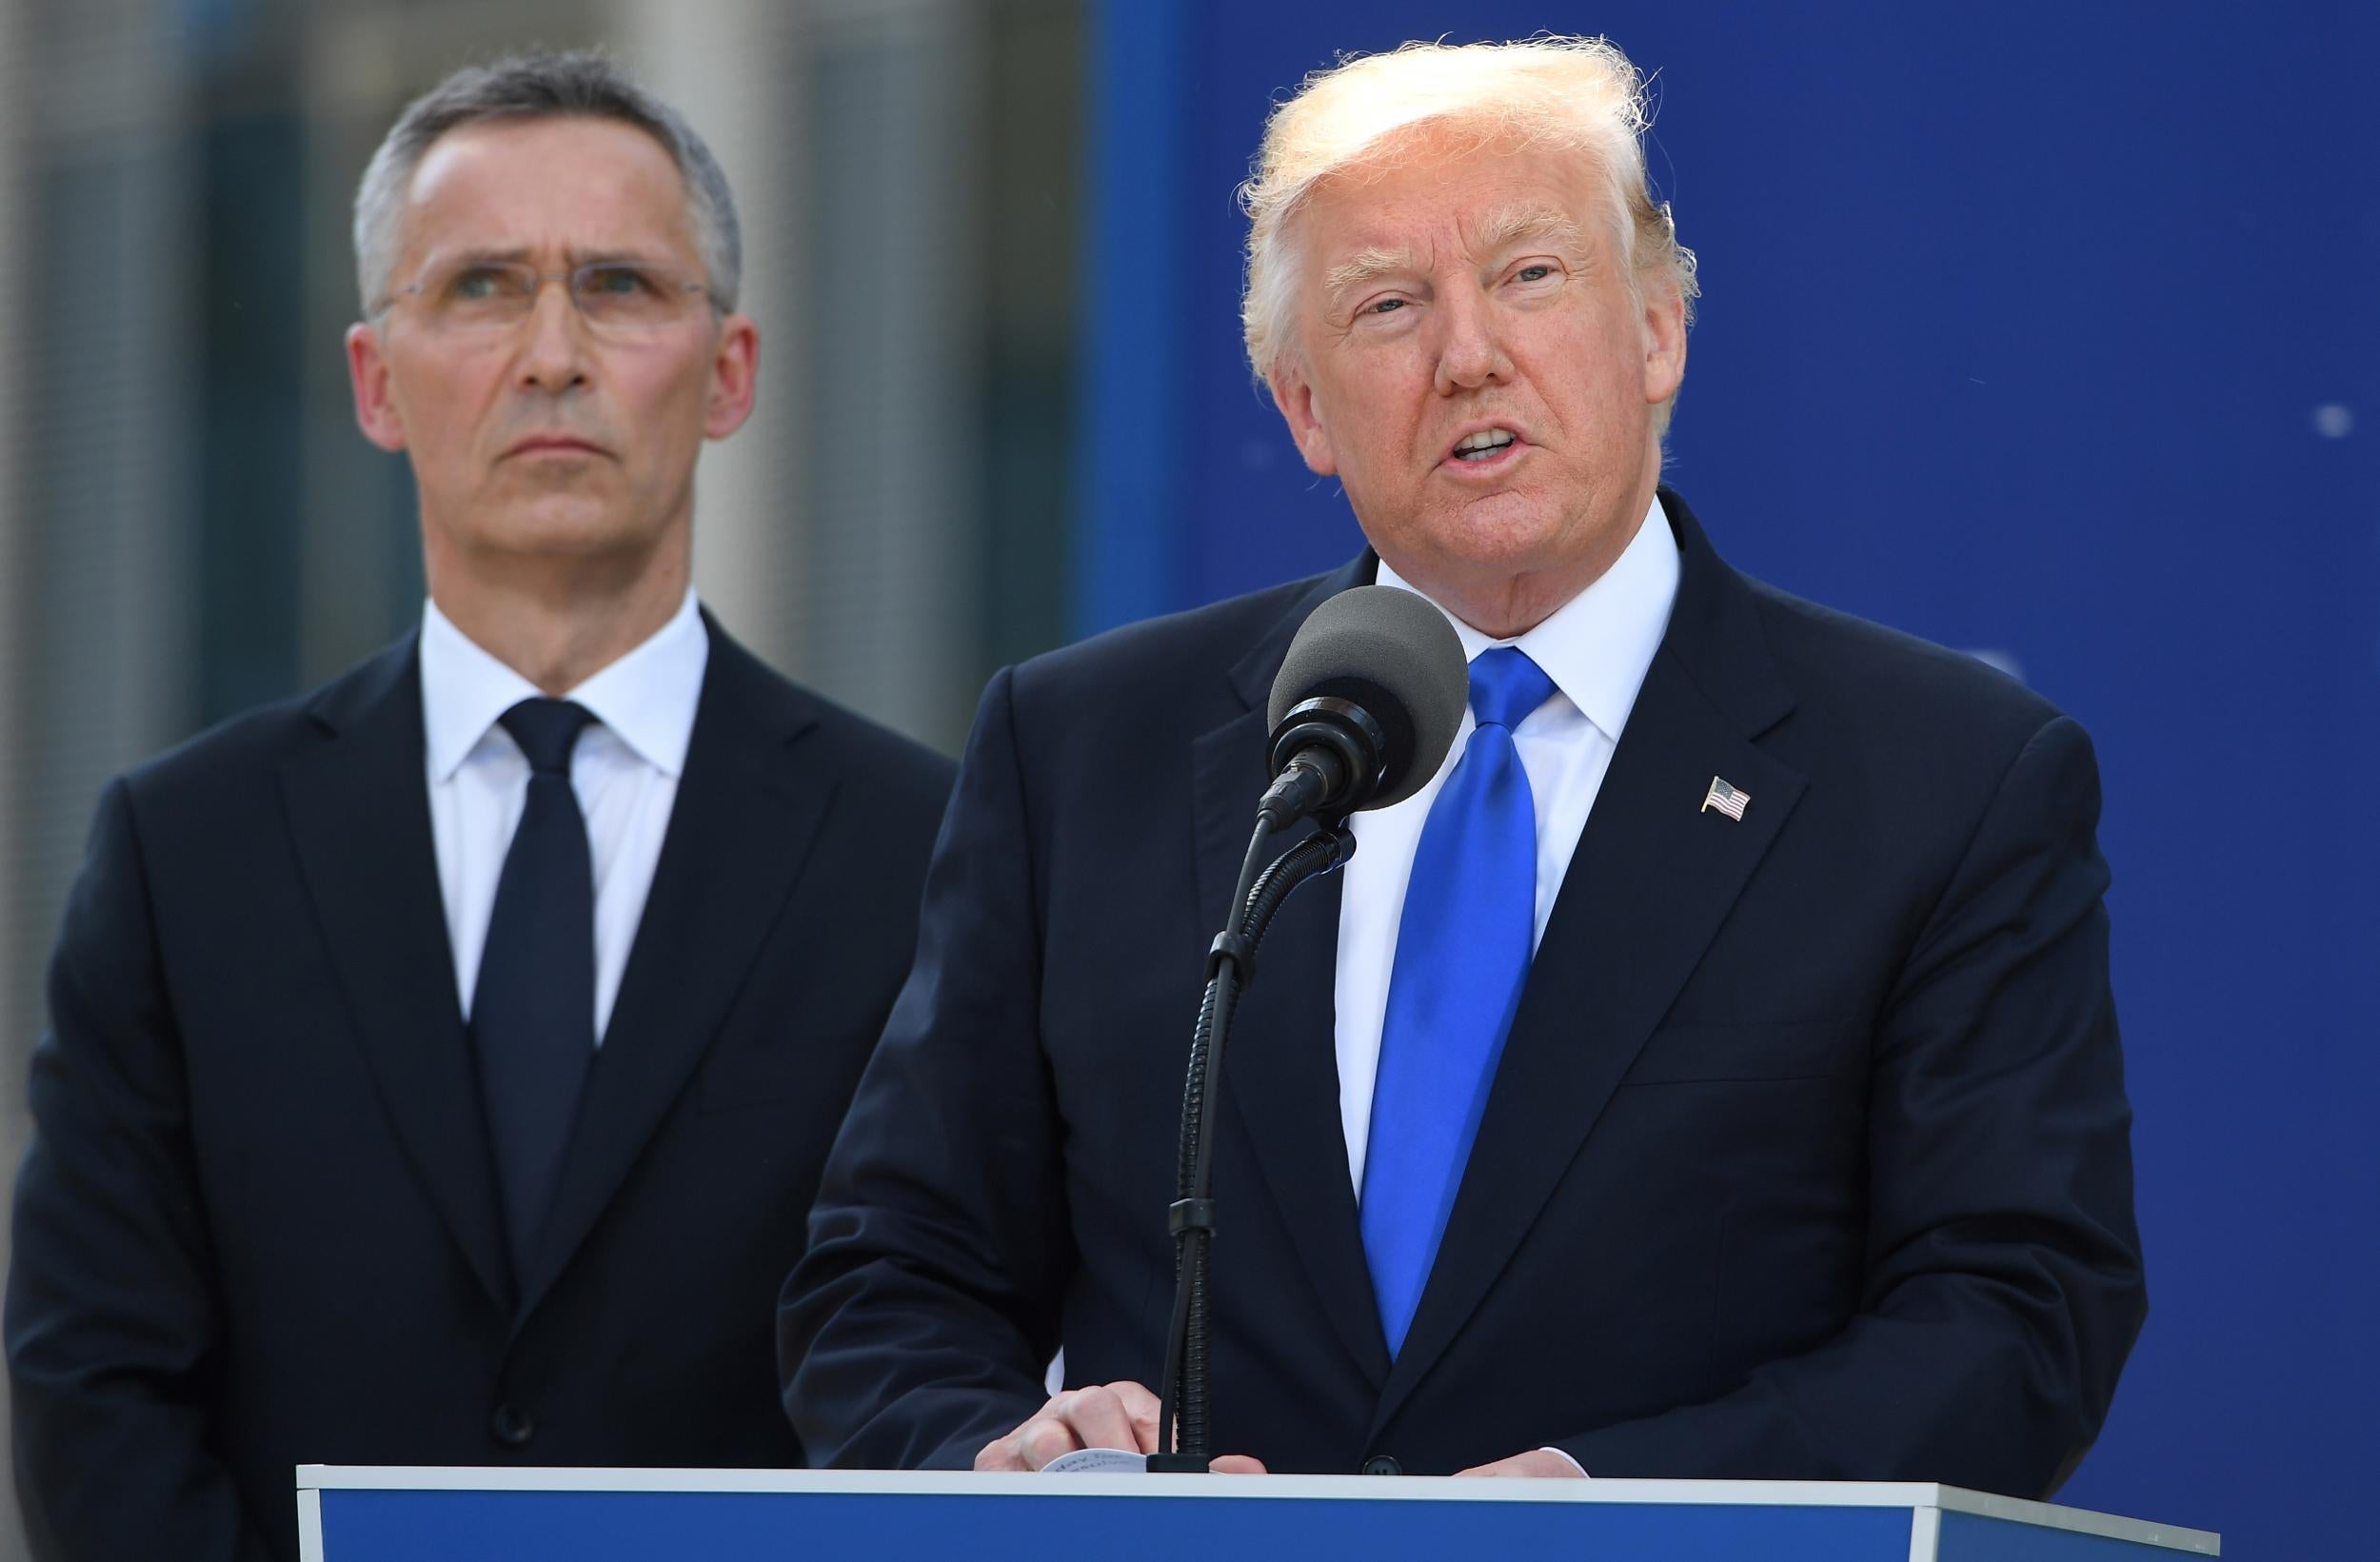 President Donald Trump delivers a speech during the unveiling ceremony of the Berlin Wall monument at a recent Nato summit